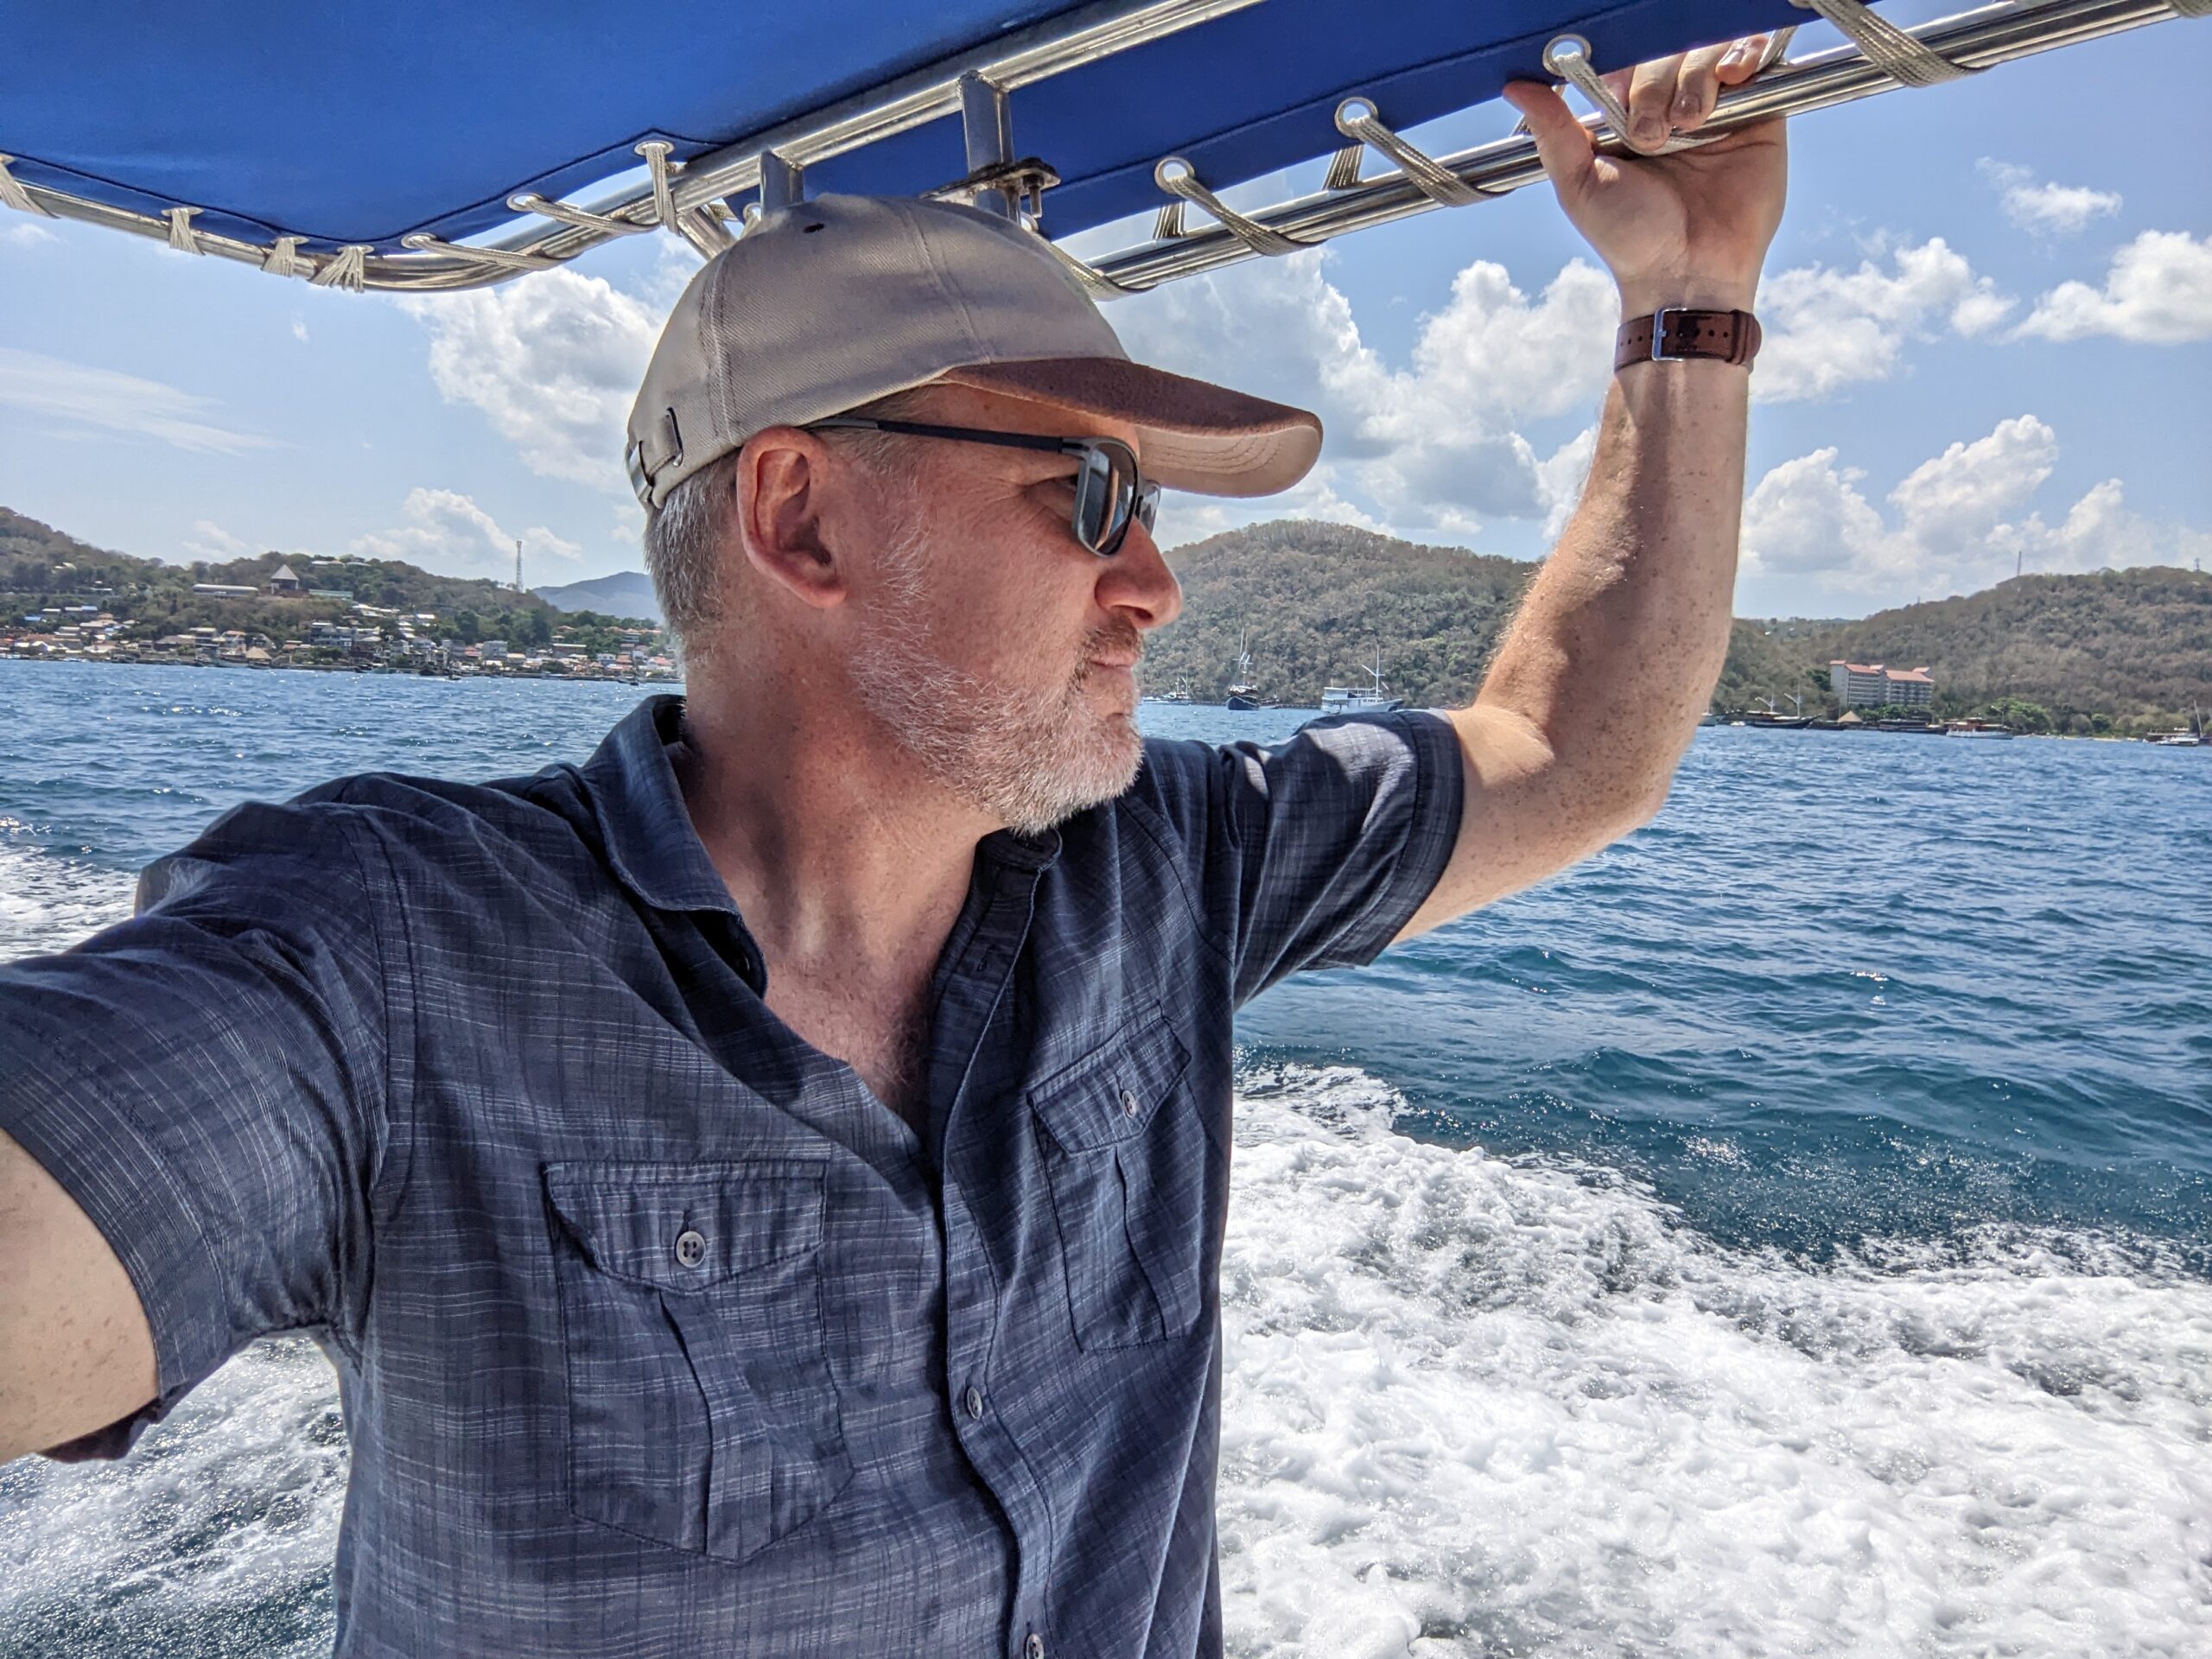 Terry Smith stands in a boat at sea working to change the effects of climate change on ocean life.